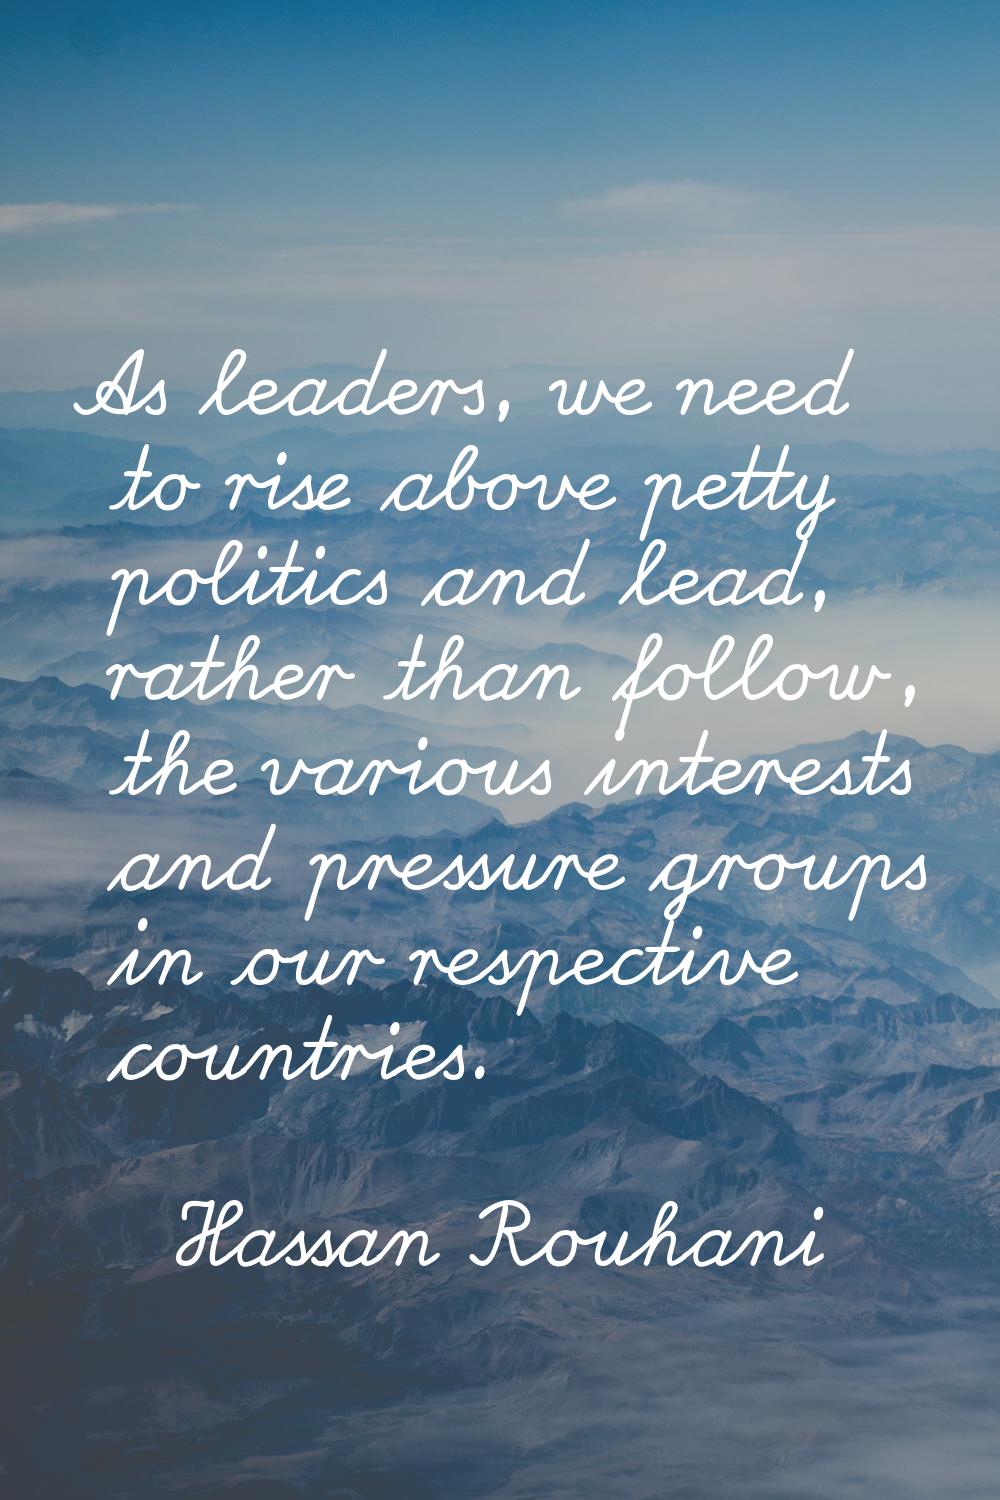 As leaders, we need to rise above petty politics and lead, rather than follow, the various interest